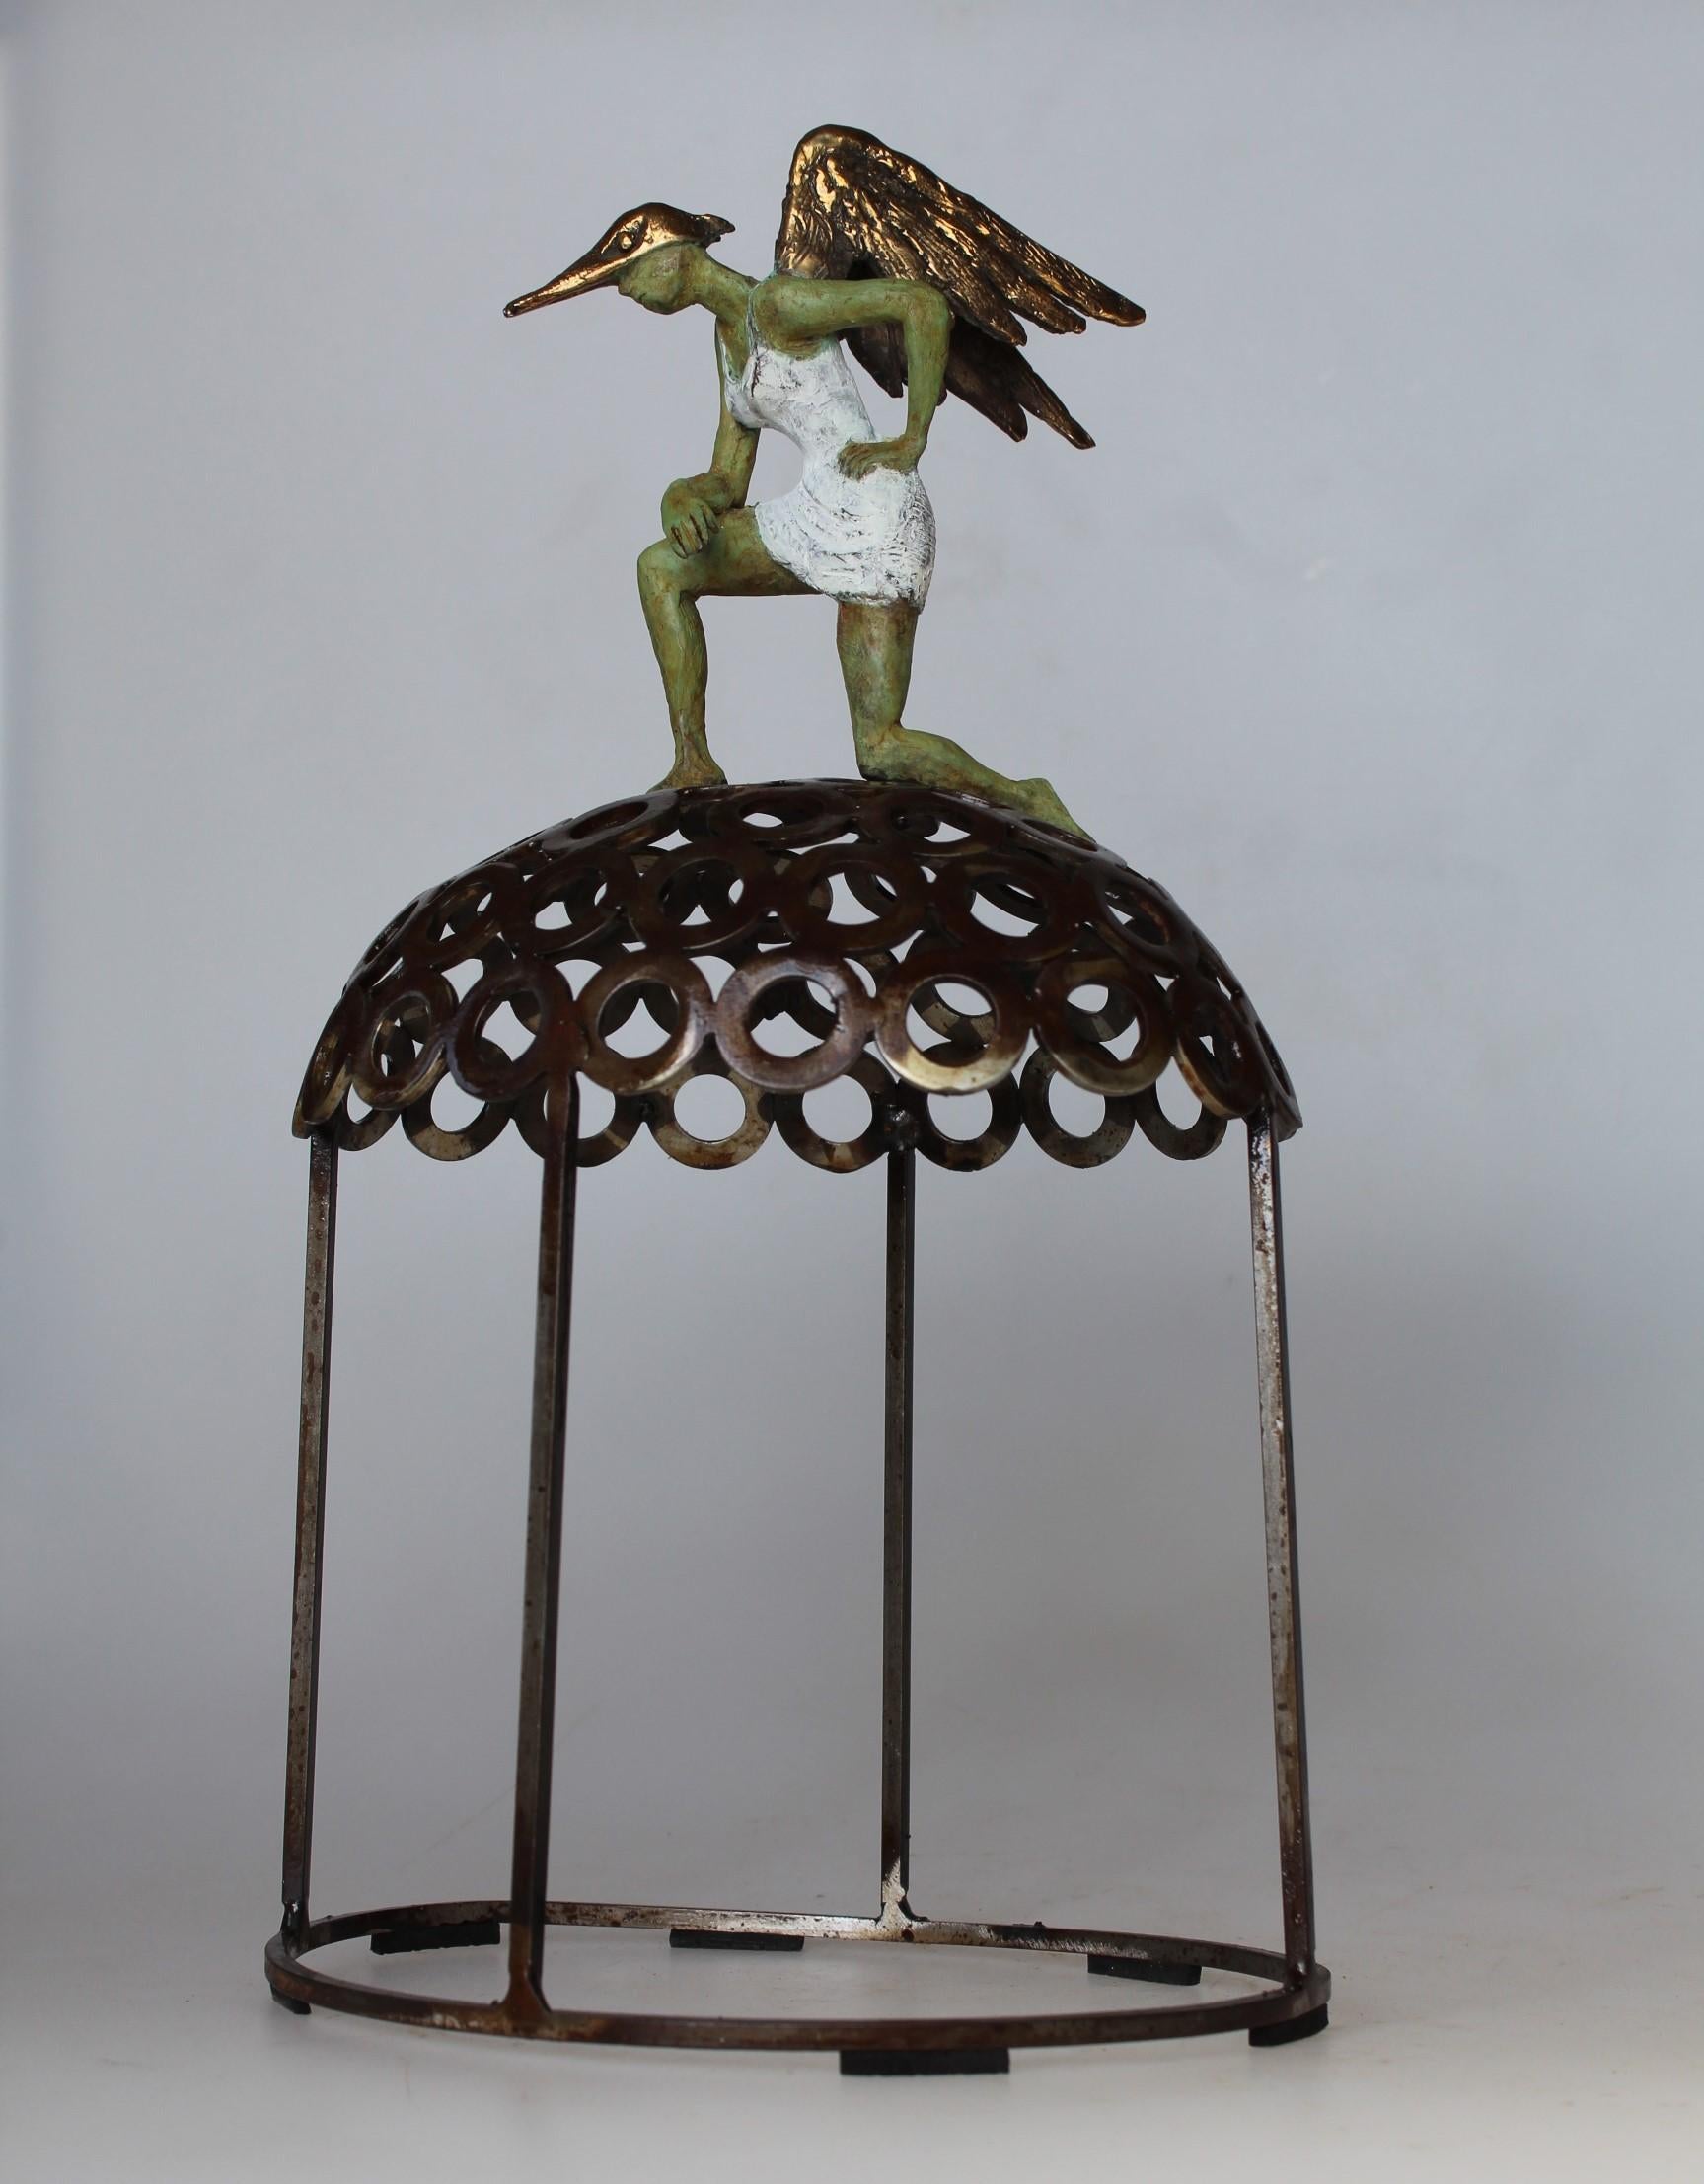 "Super Lady" contemporary bronze table sculpture figurative liberty strength fly